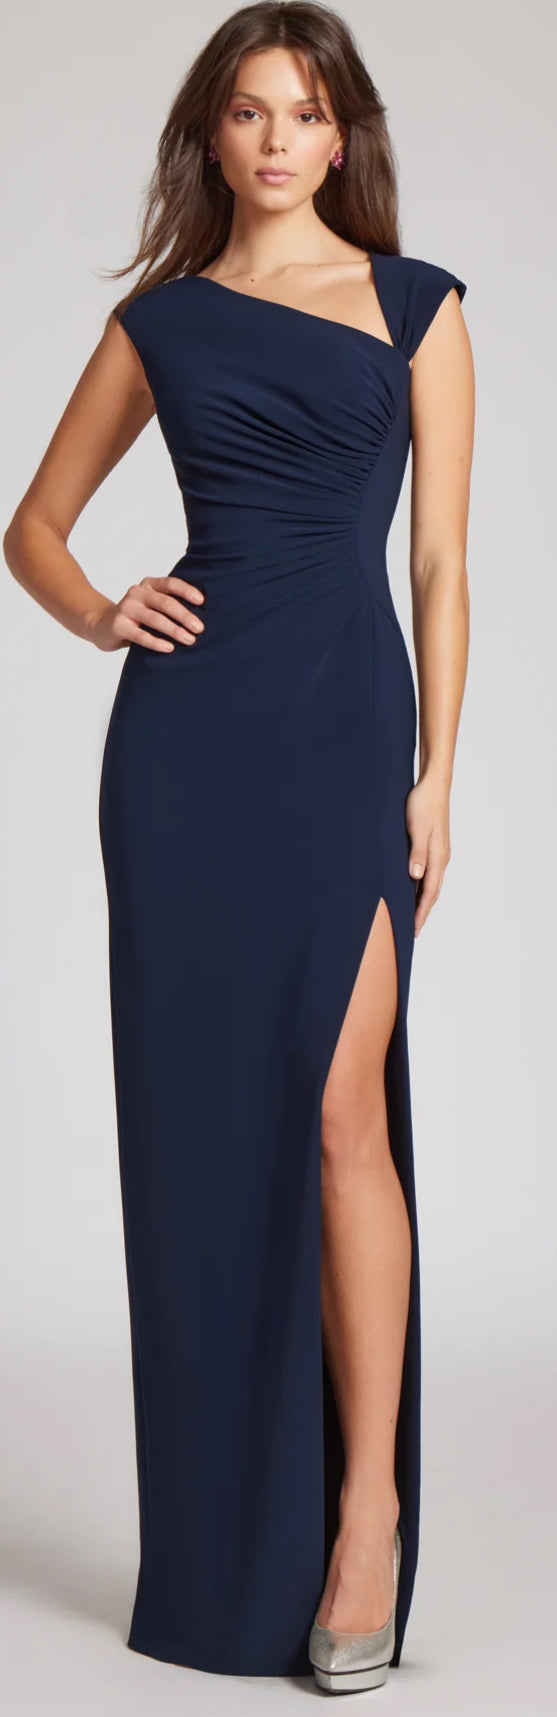 Crepe Asymmetrical Neck Rouched Bodice Gown